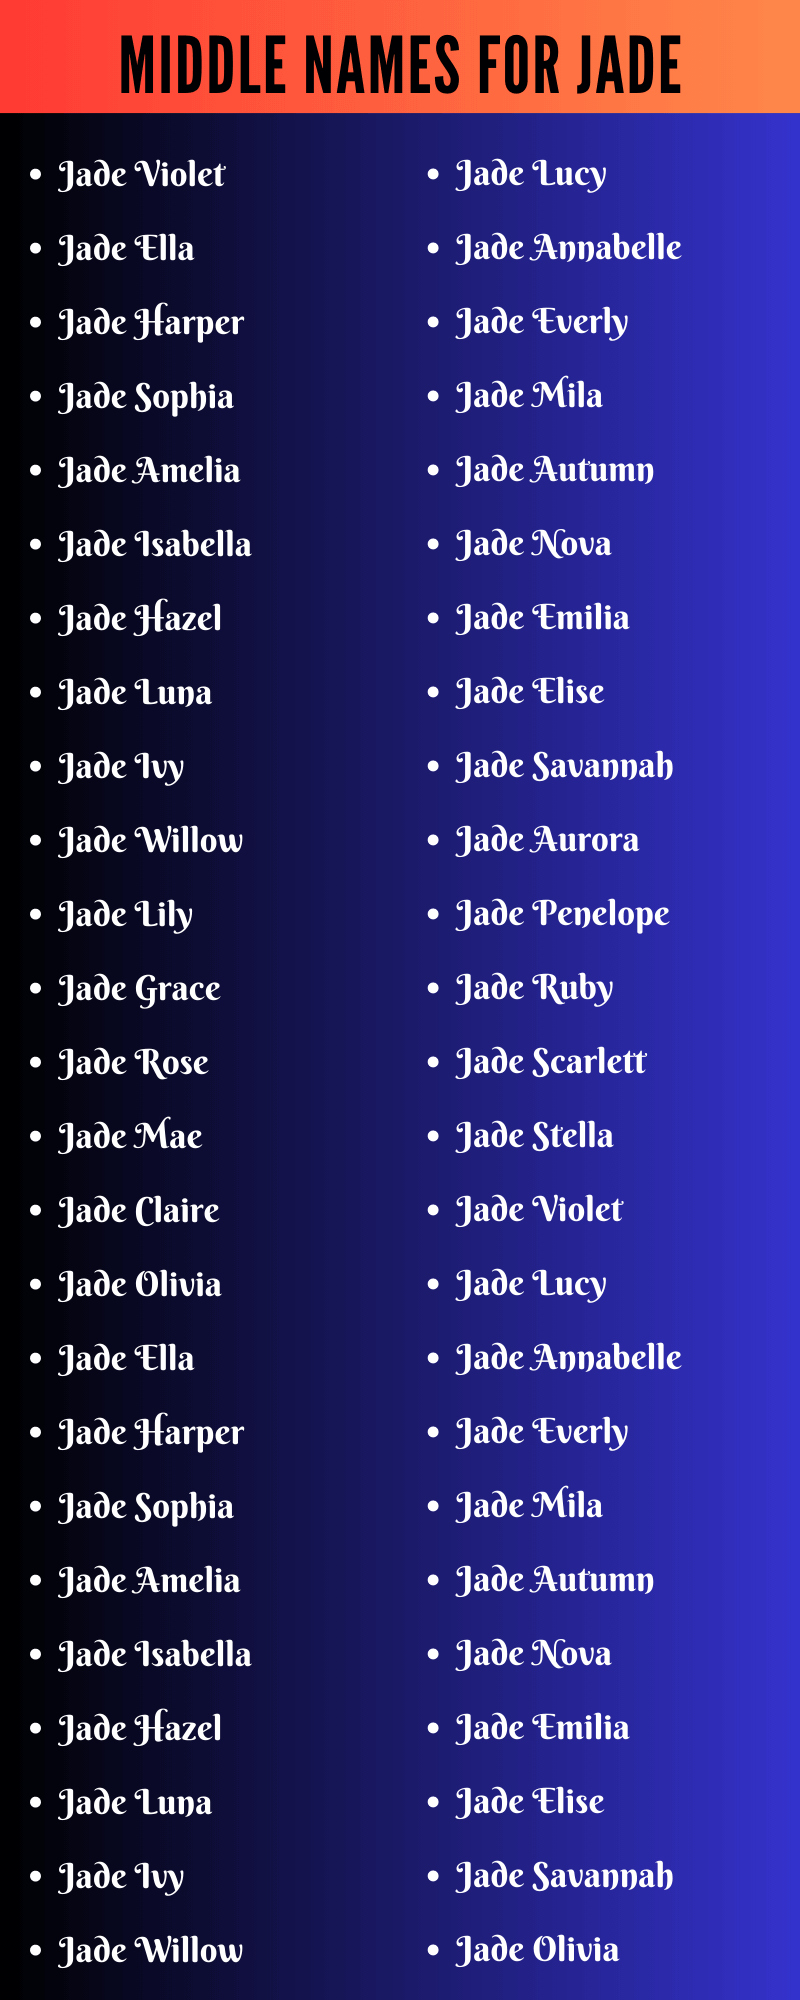 Middle Names For Jade